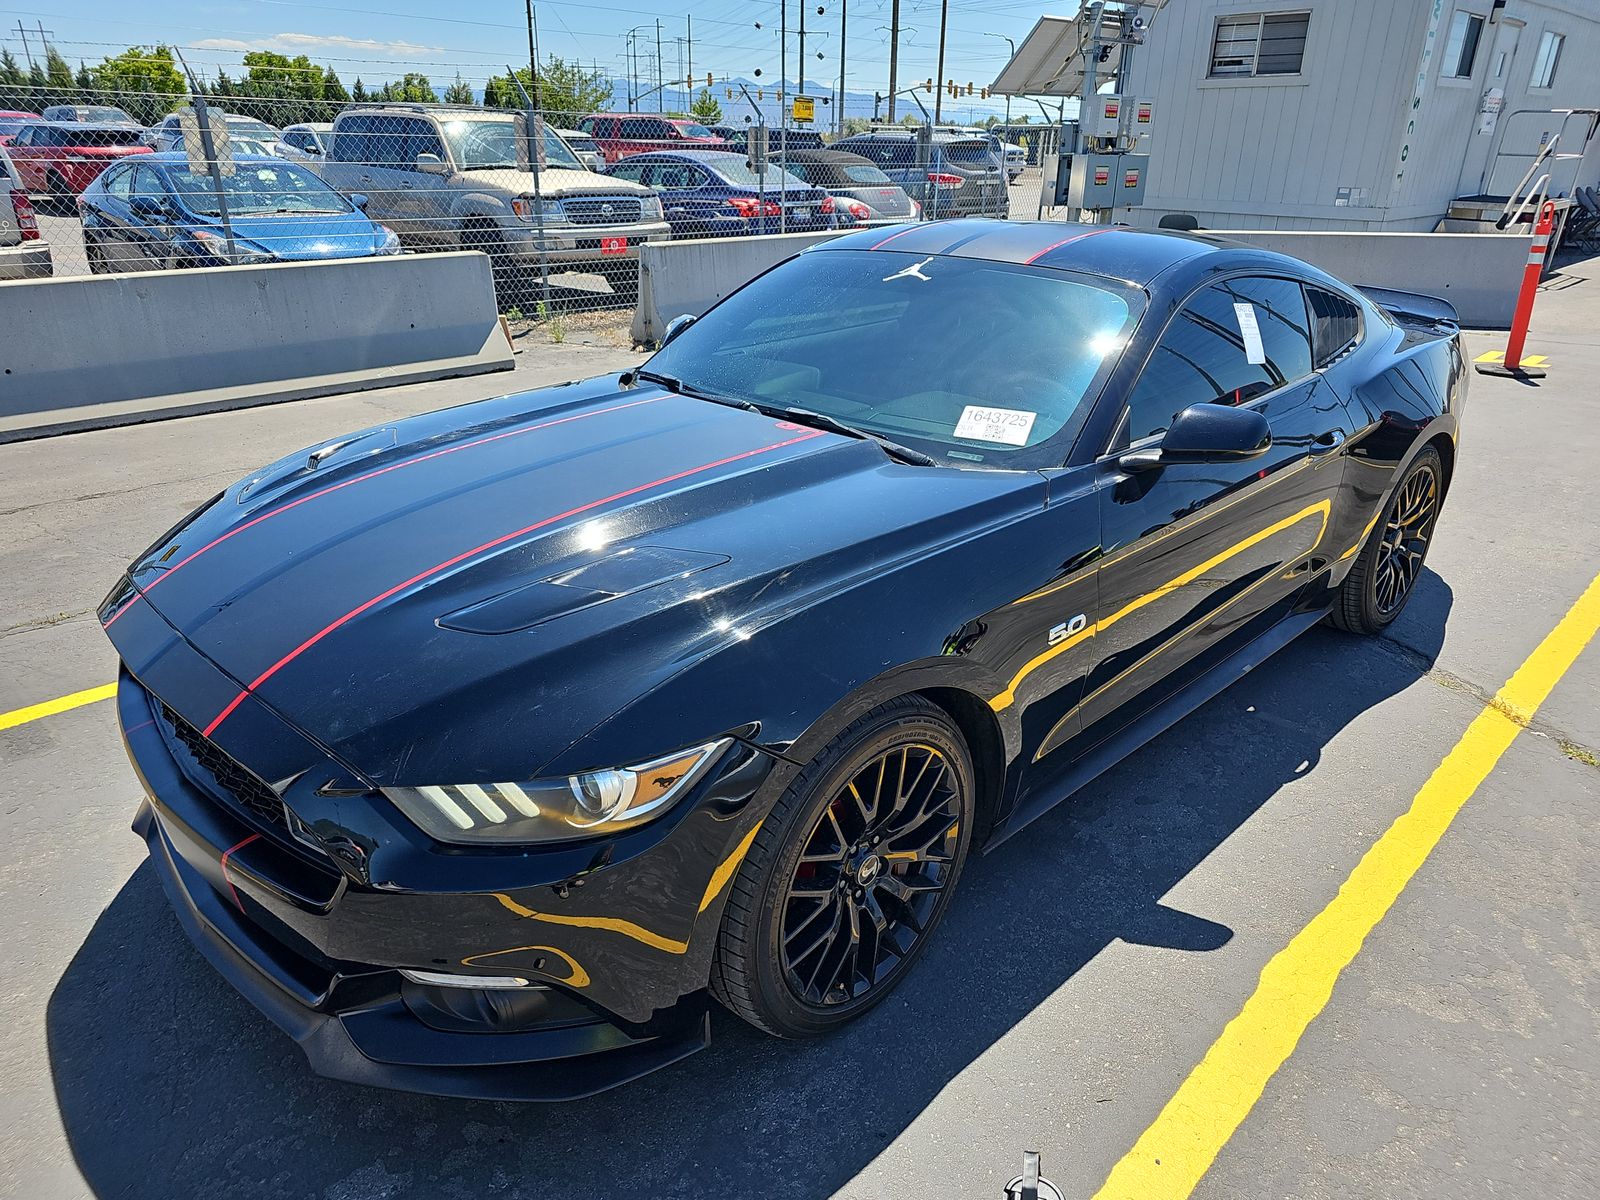 2015 Ford Mustang GT Premium RWD